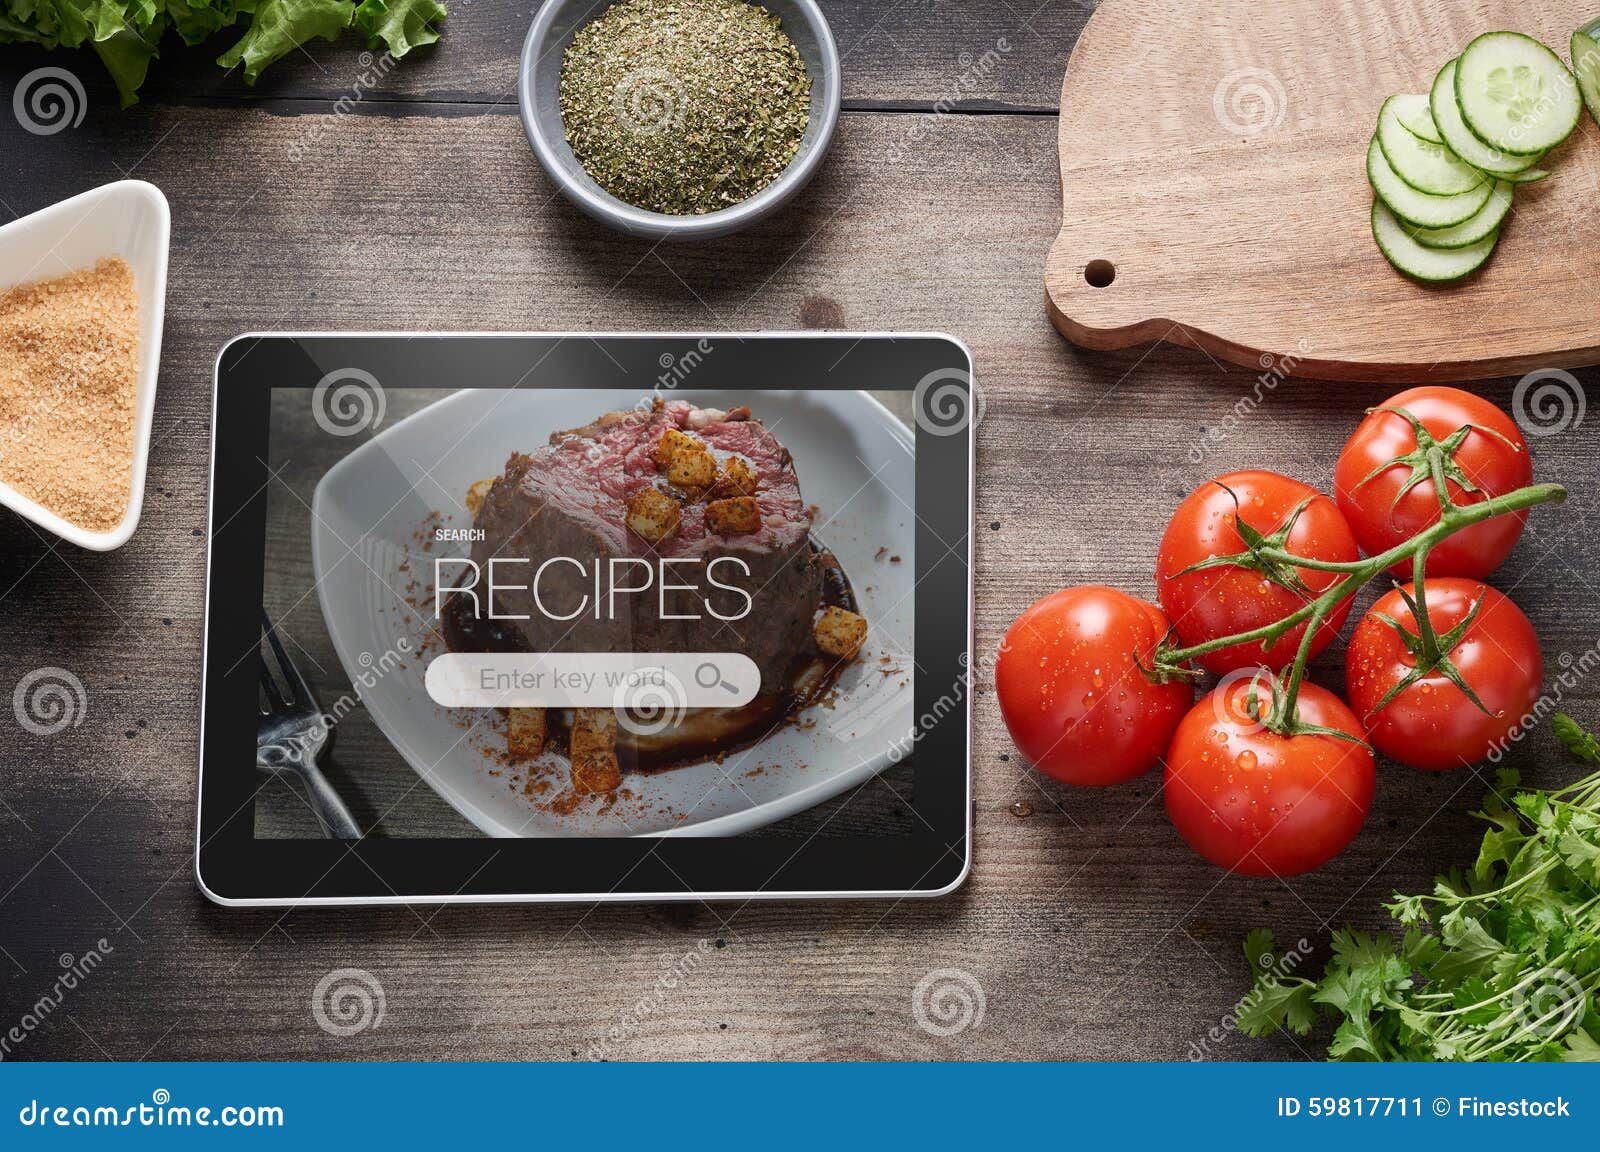 food recipes on tablet computer